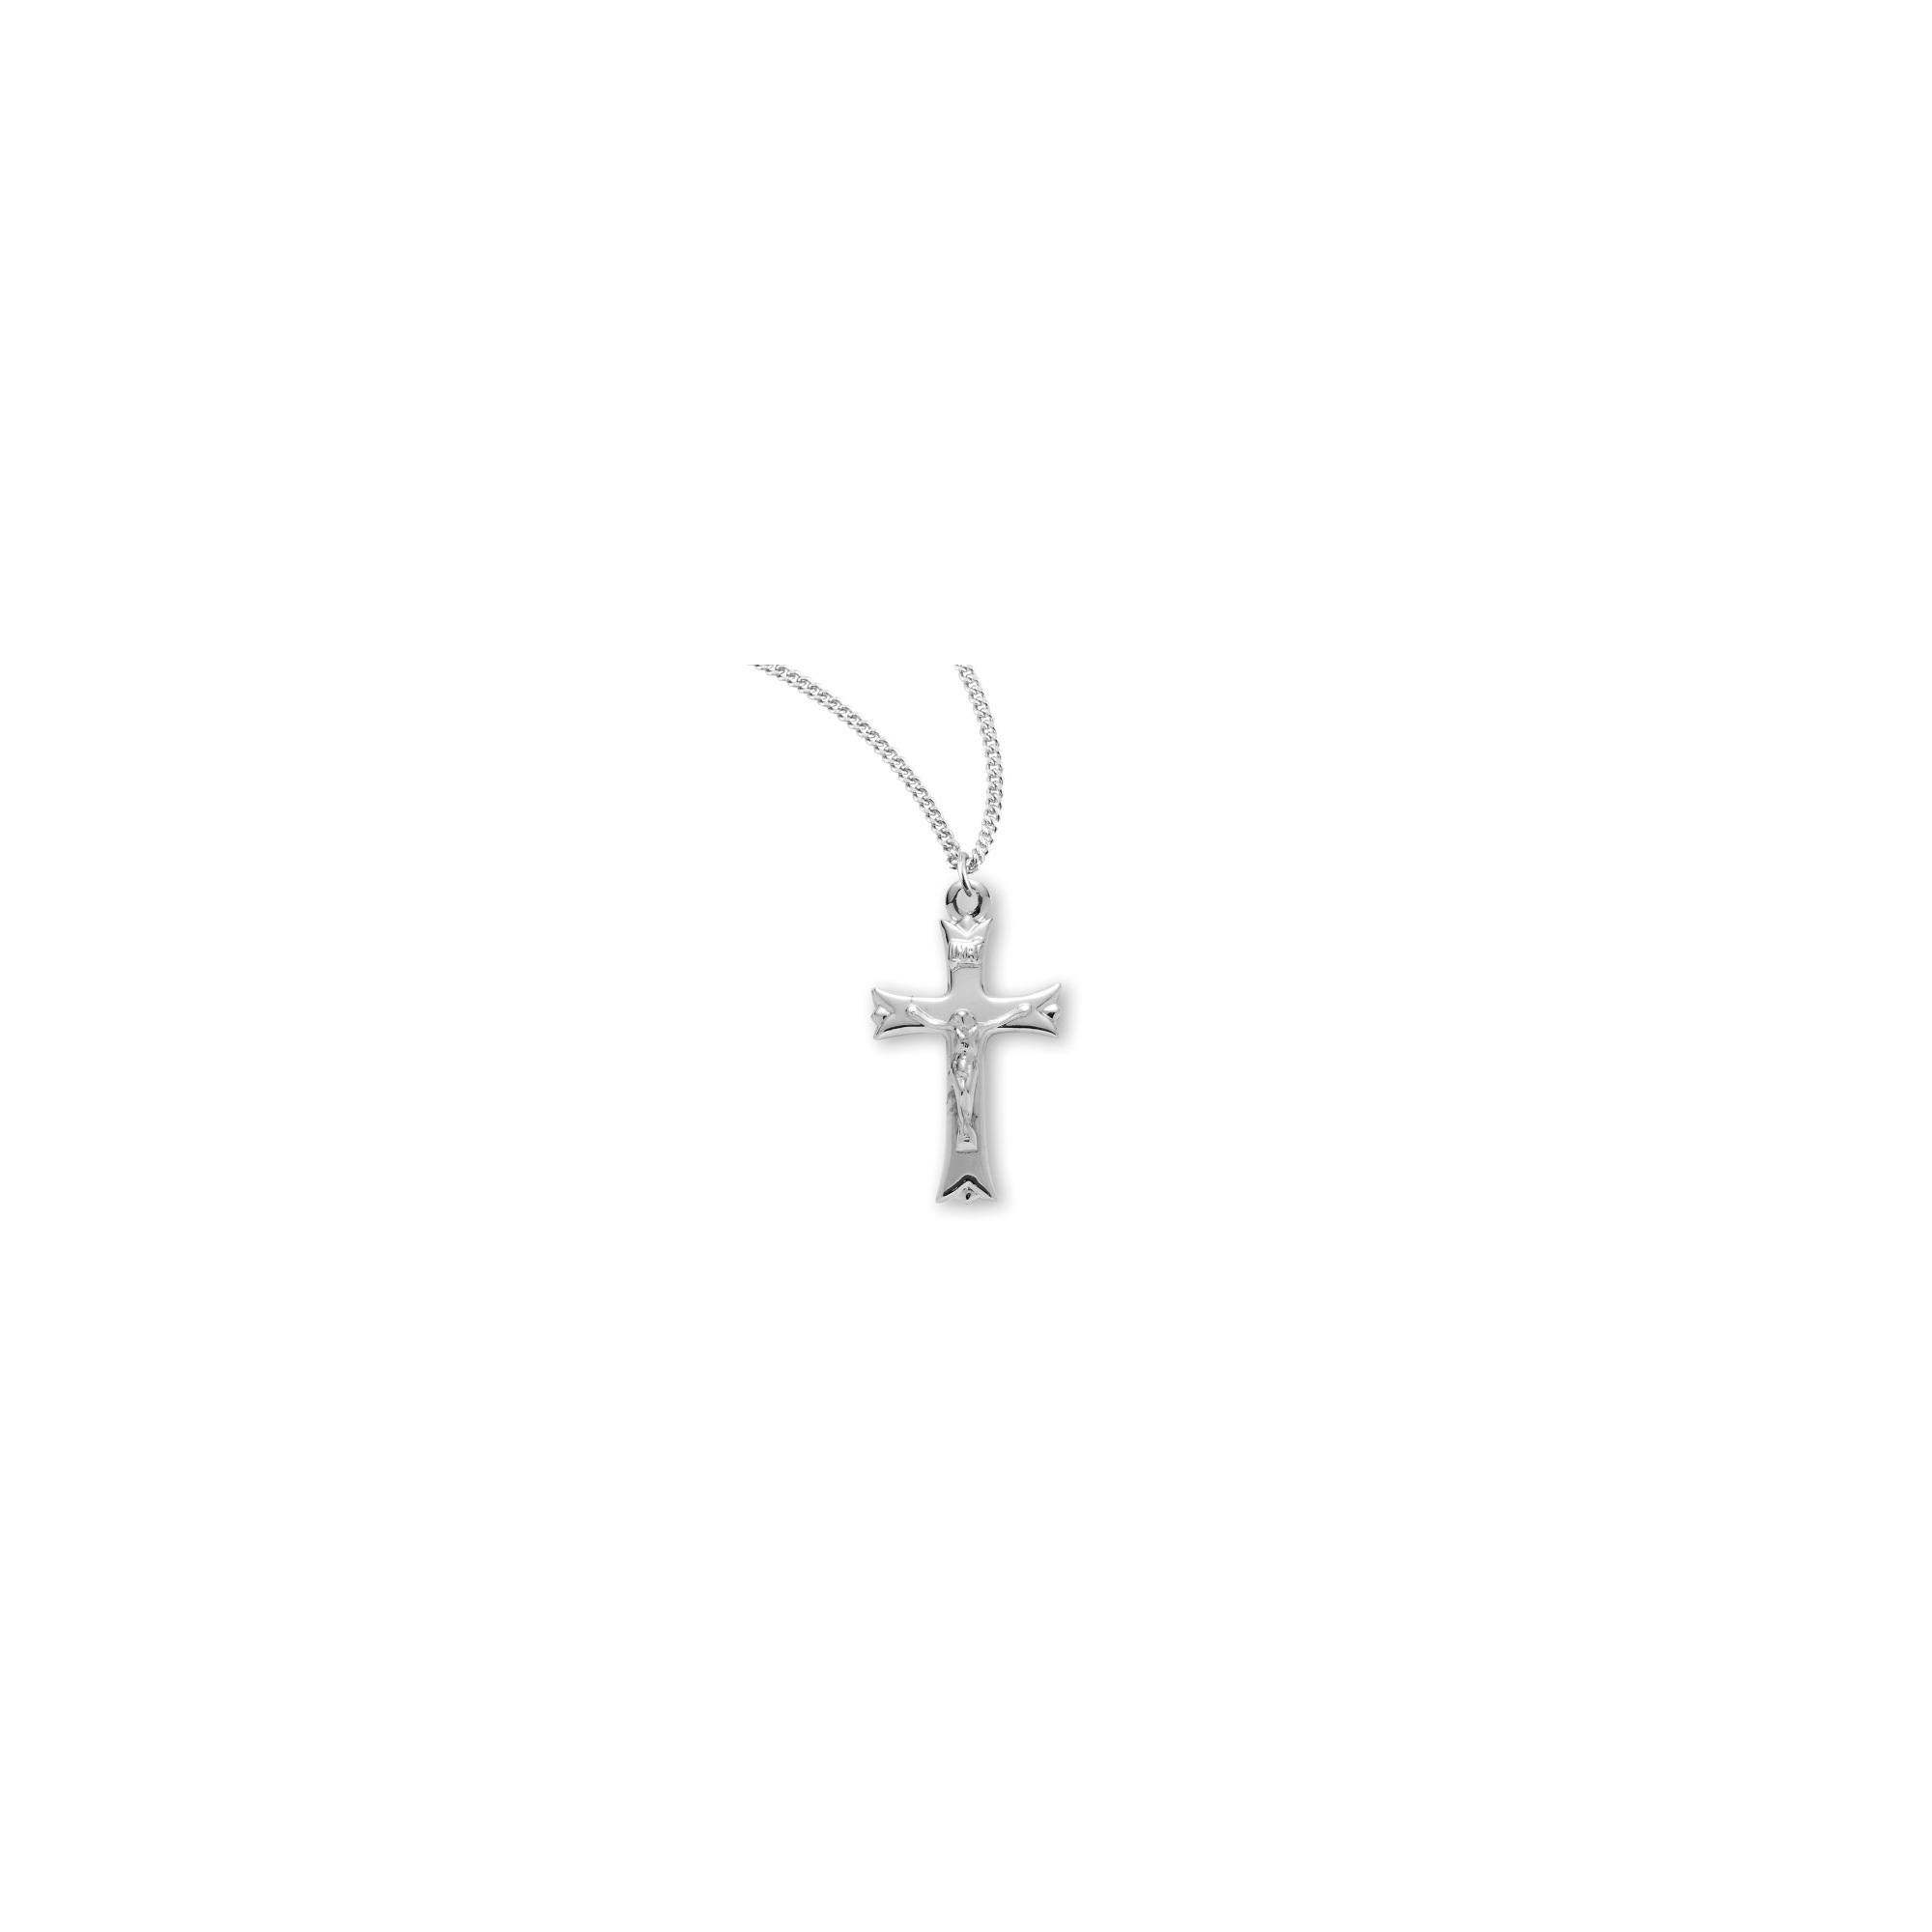 Flare-Tipped Sterling Silver Crucifix Necklace | The Catholic Company®